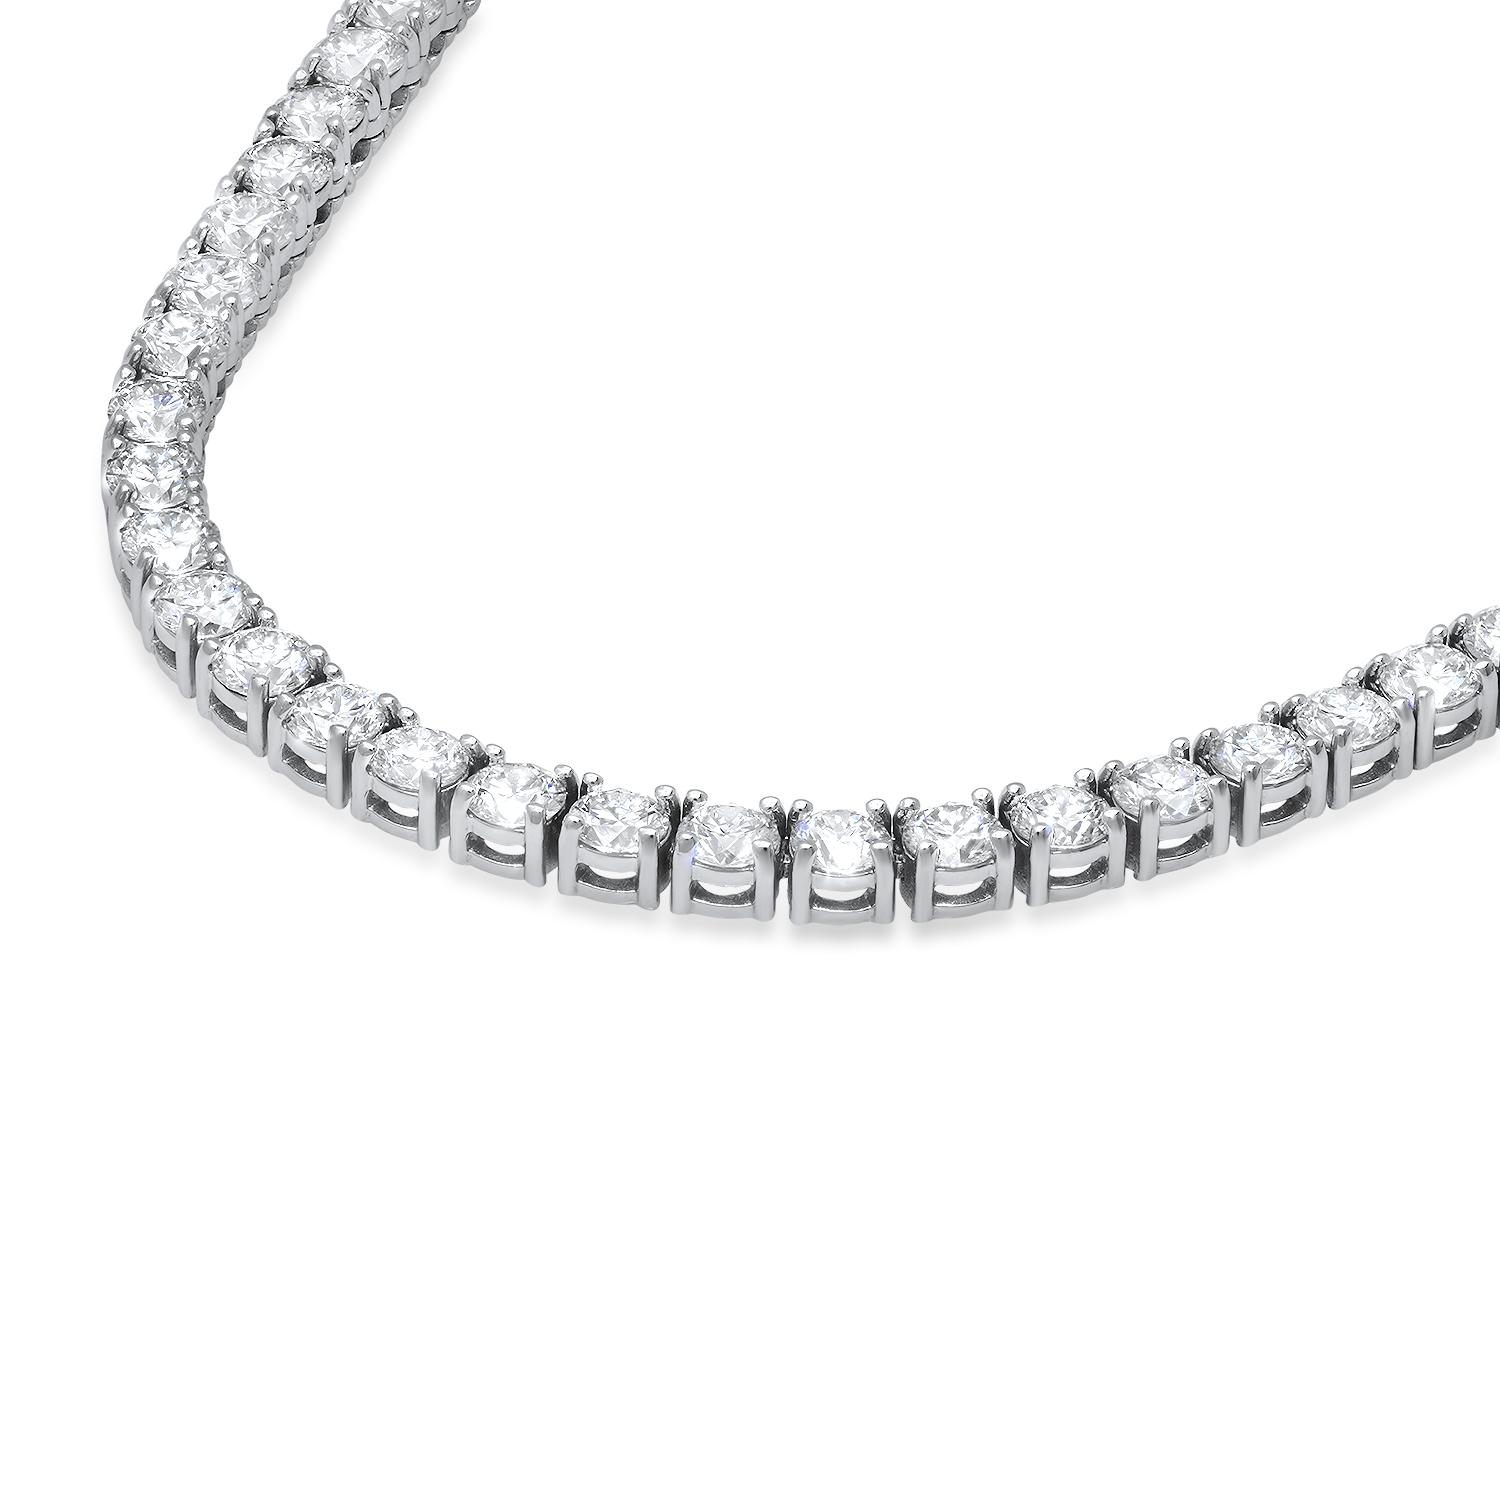 18K White Gold and 21.75ct Diamond Necklace